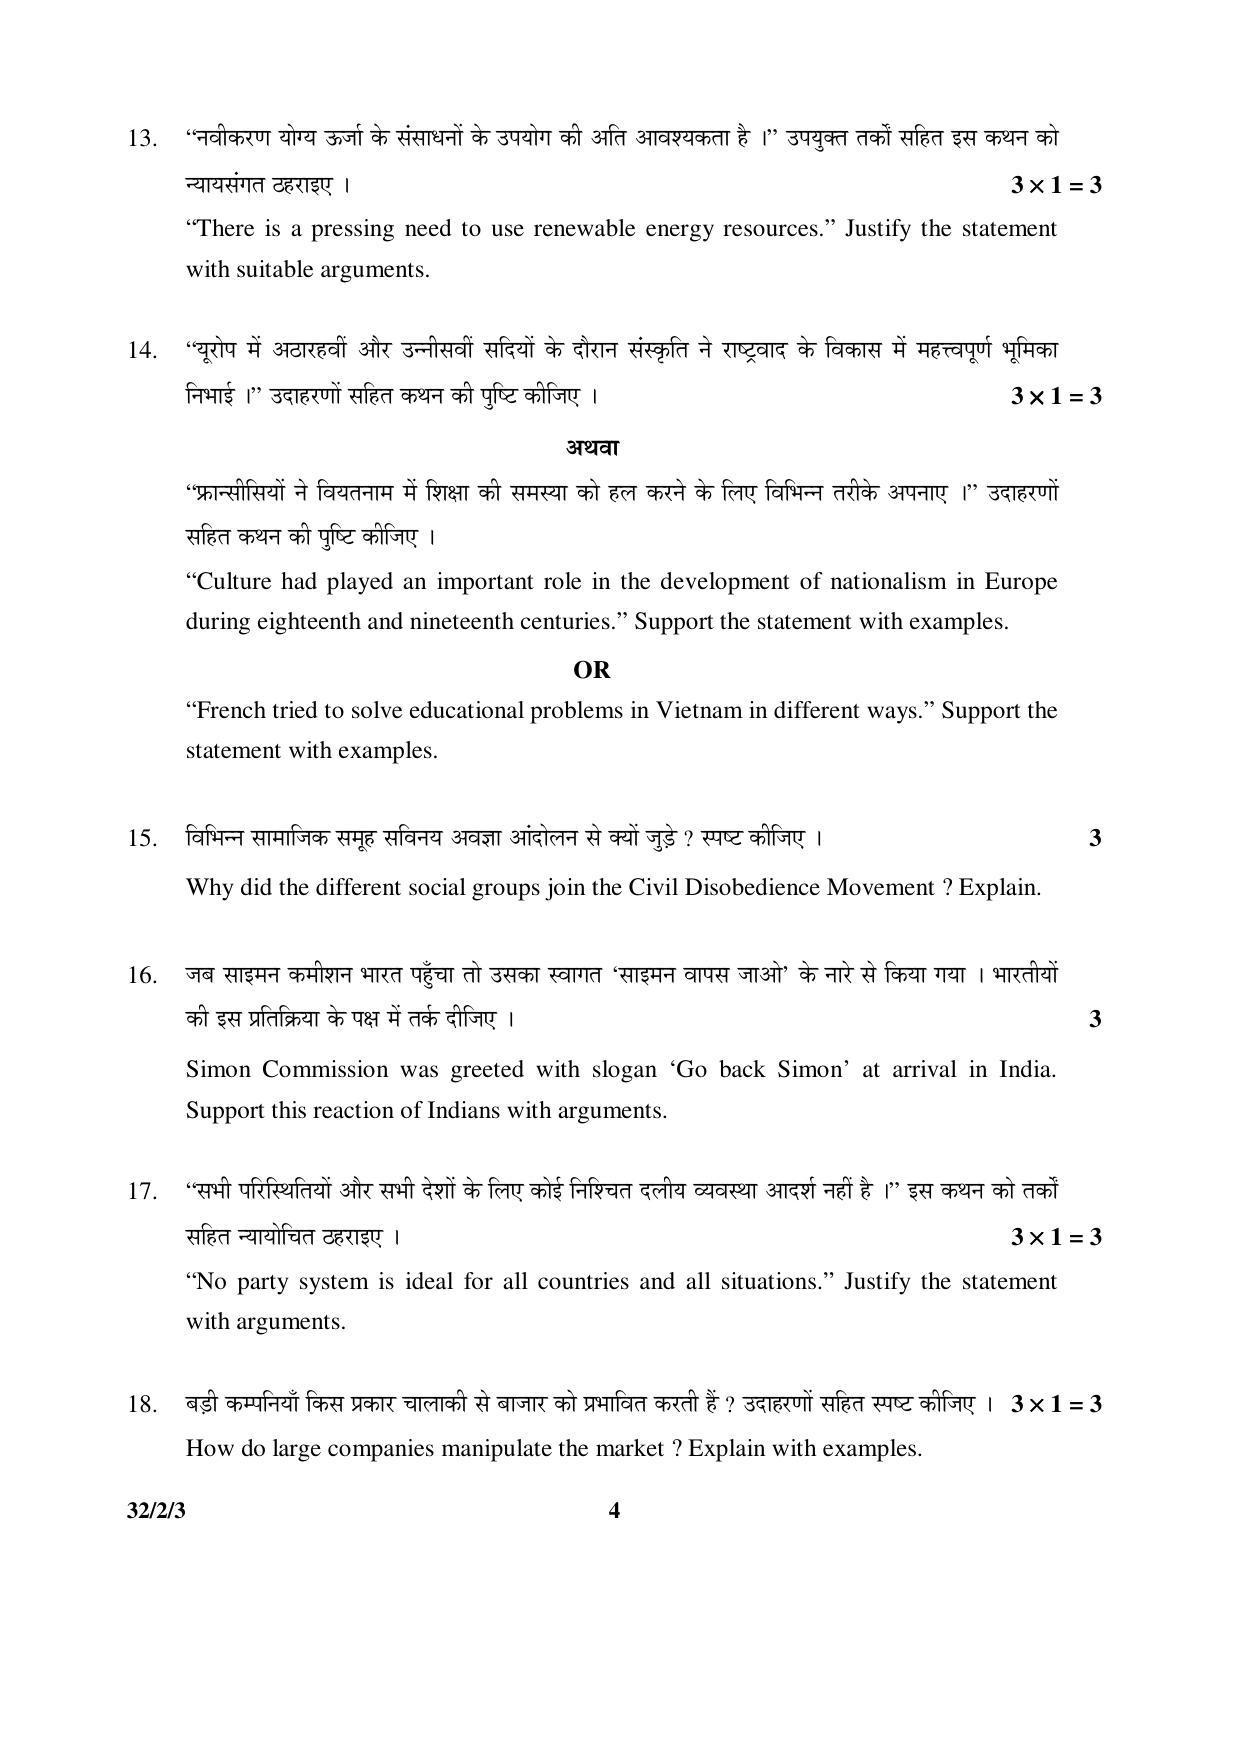 CBSE Class 10 32-2-3 _Social Science 2016 Question Paper - Page 4